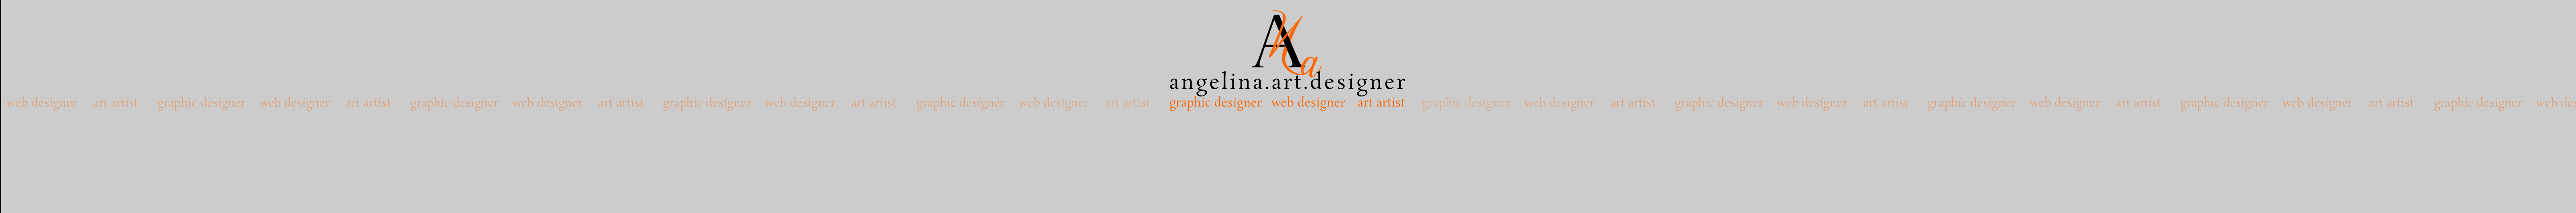 Angelina Malykh's profile banner